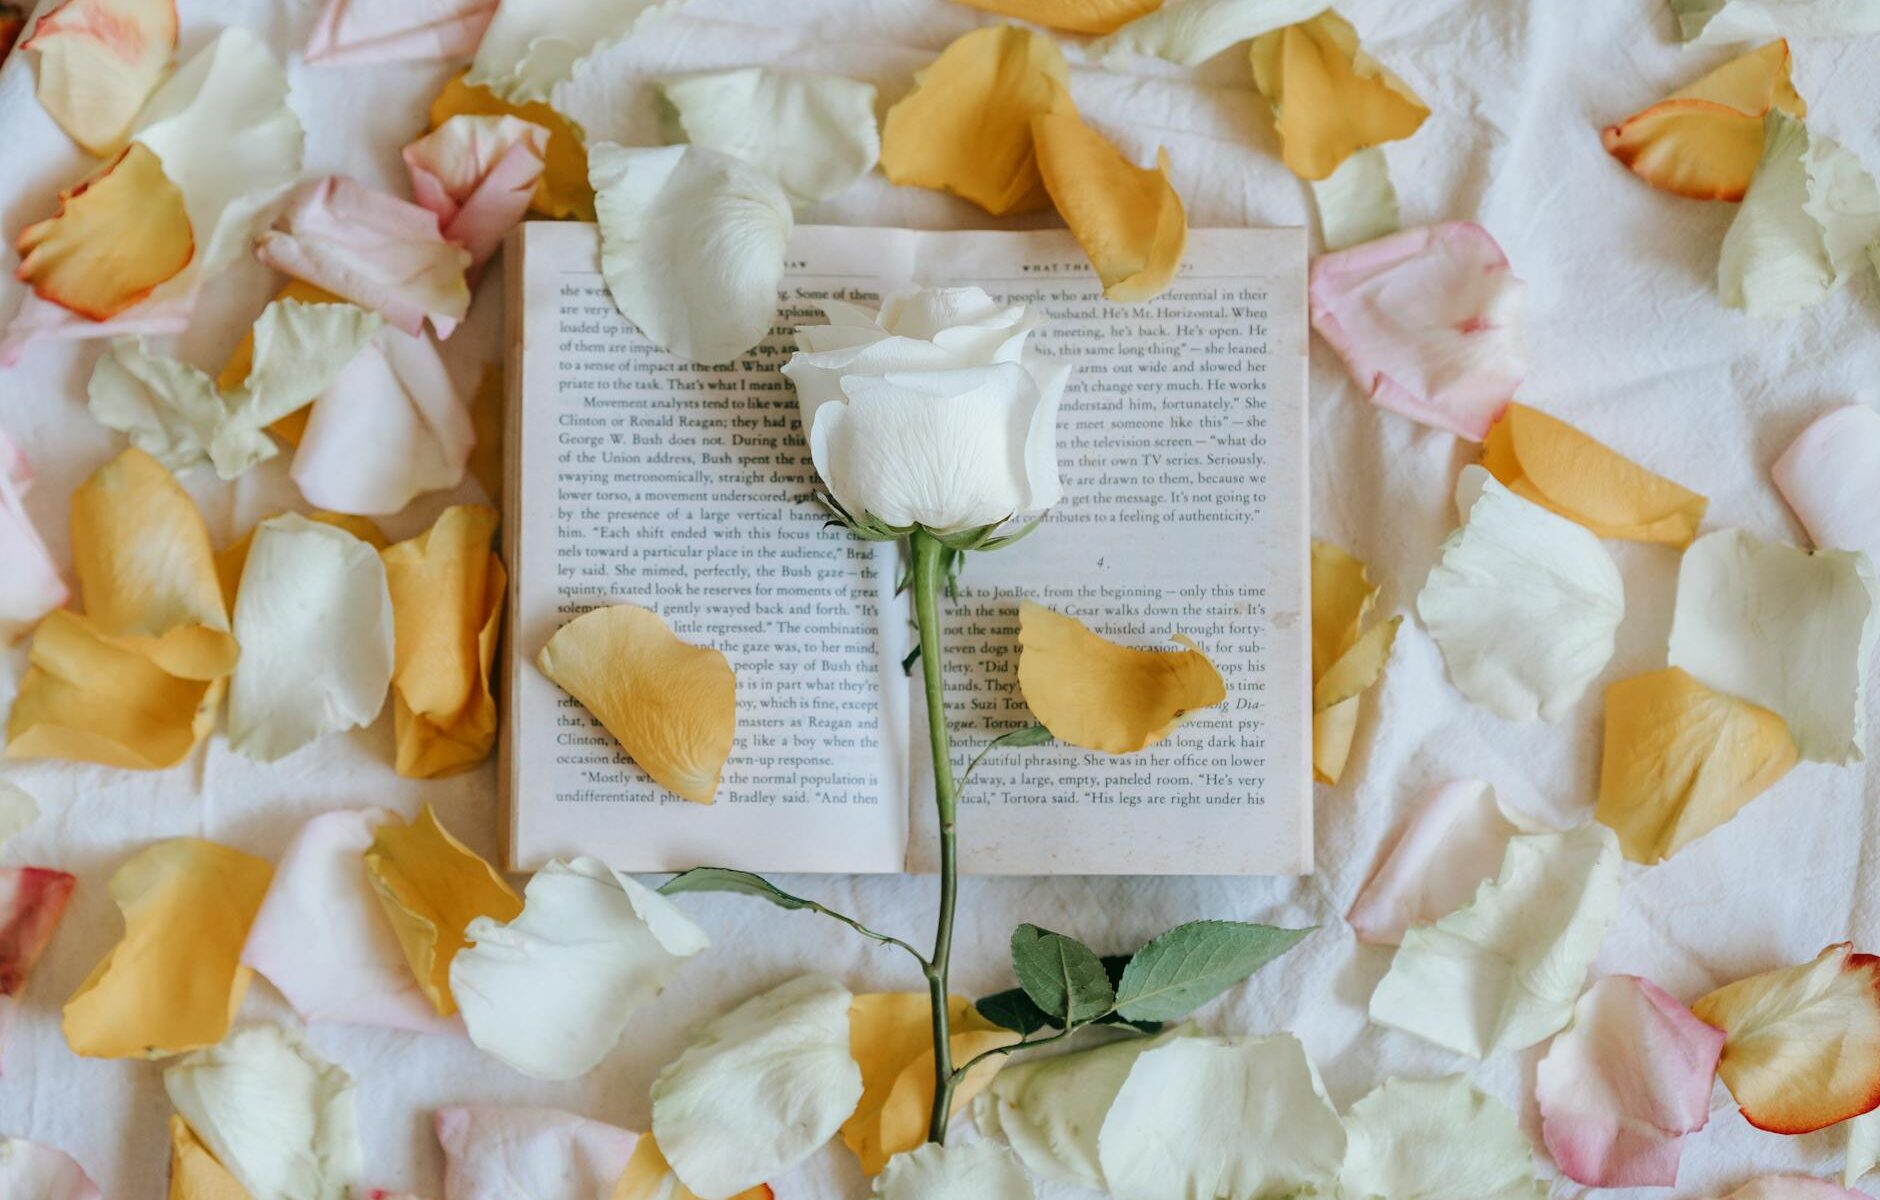 rose on book near scattered petals